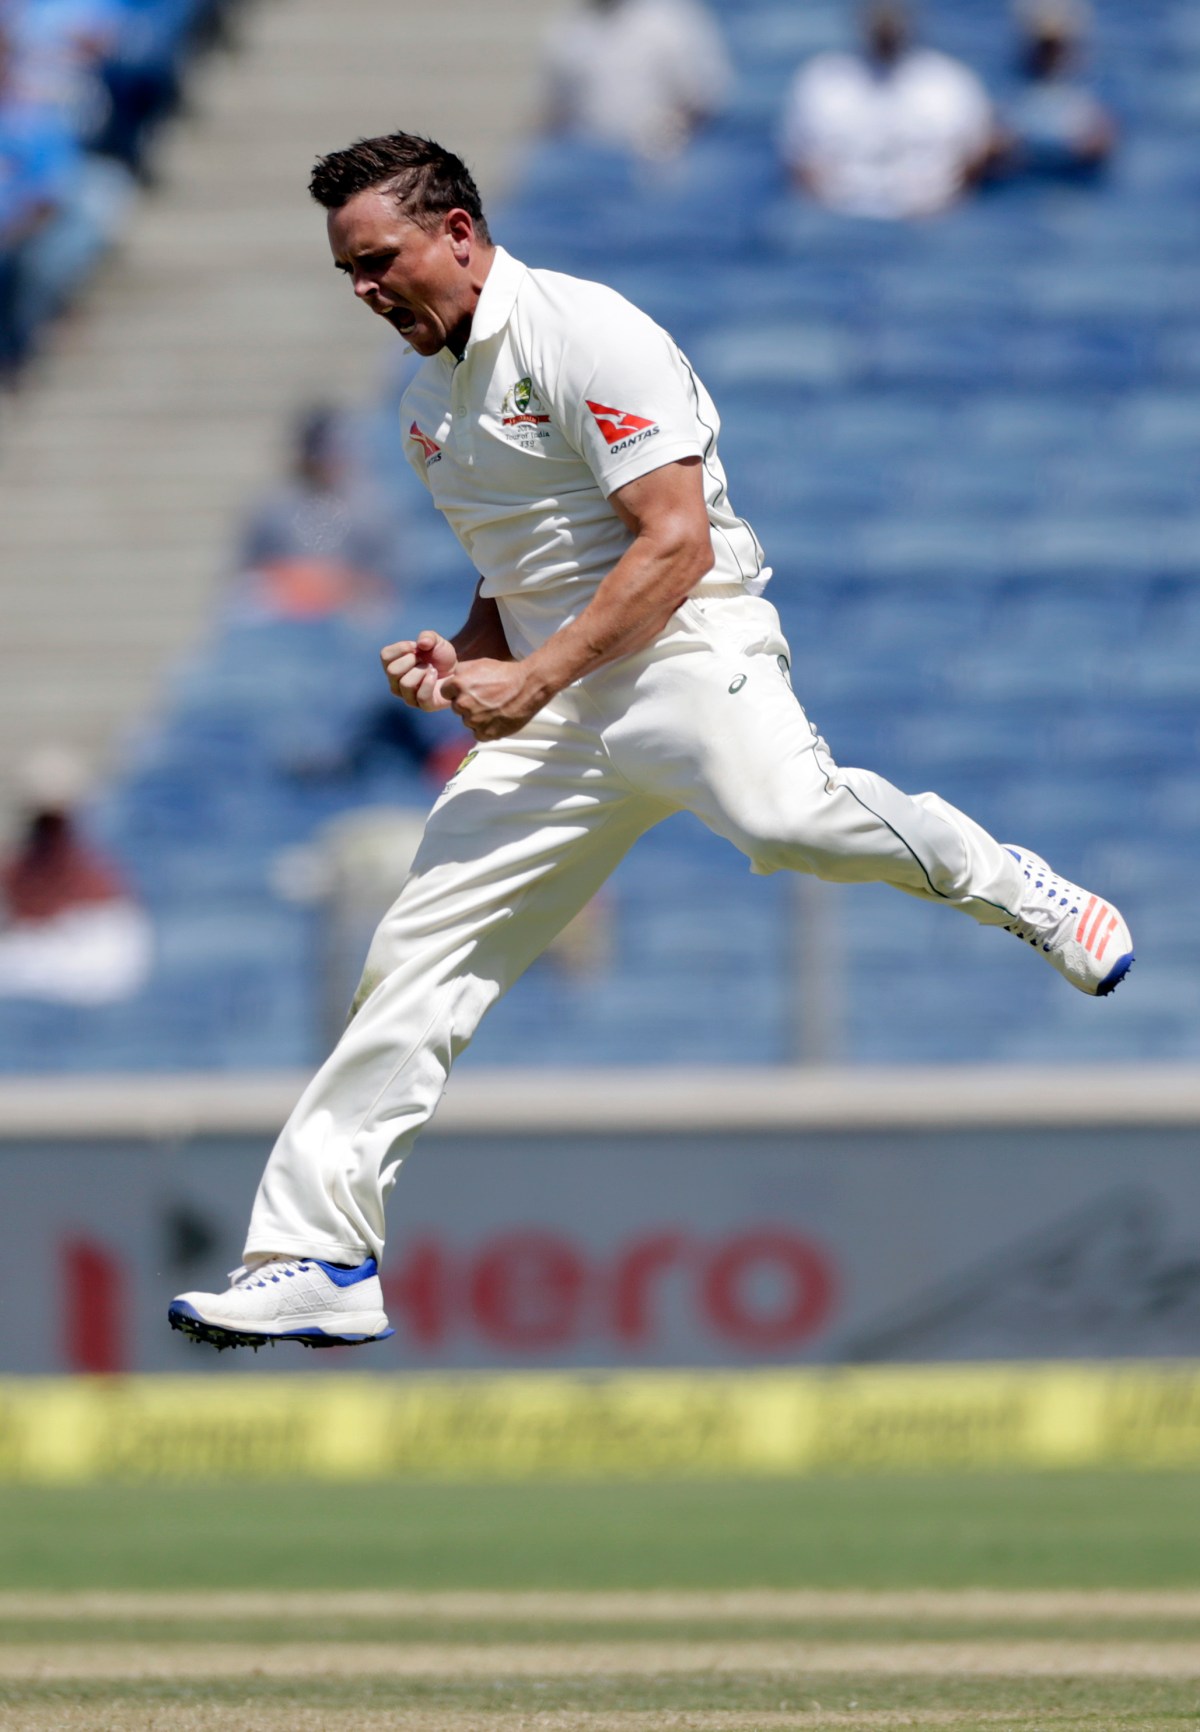 Australia's Steve O'Keefe celebrates after Virat Kohli's wicket during third day of the first cricket test match against India in Pune, India, Saturday, Feb. 25, 2017. (AP Photo/Rajanish Kakade)